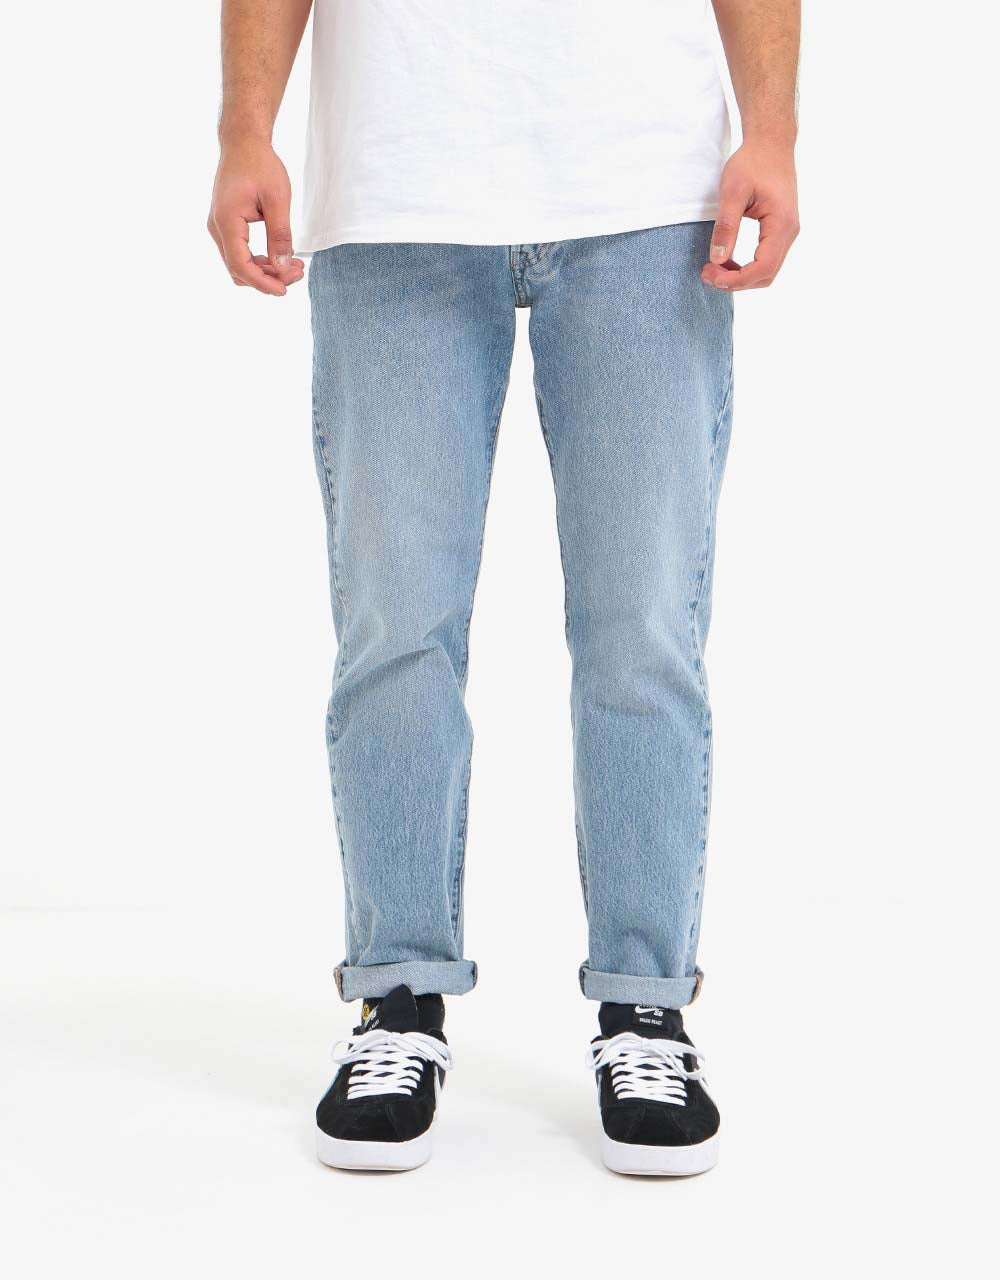 Skateboarding 501® Jeans - S&E Stf Homewood – Route One